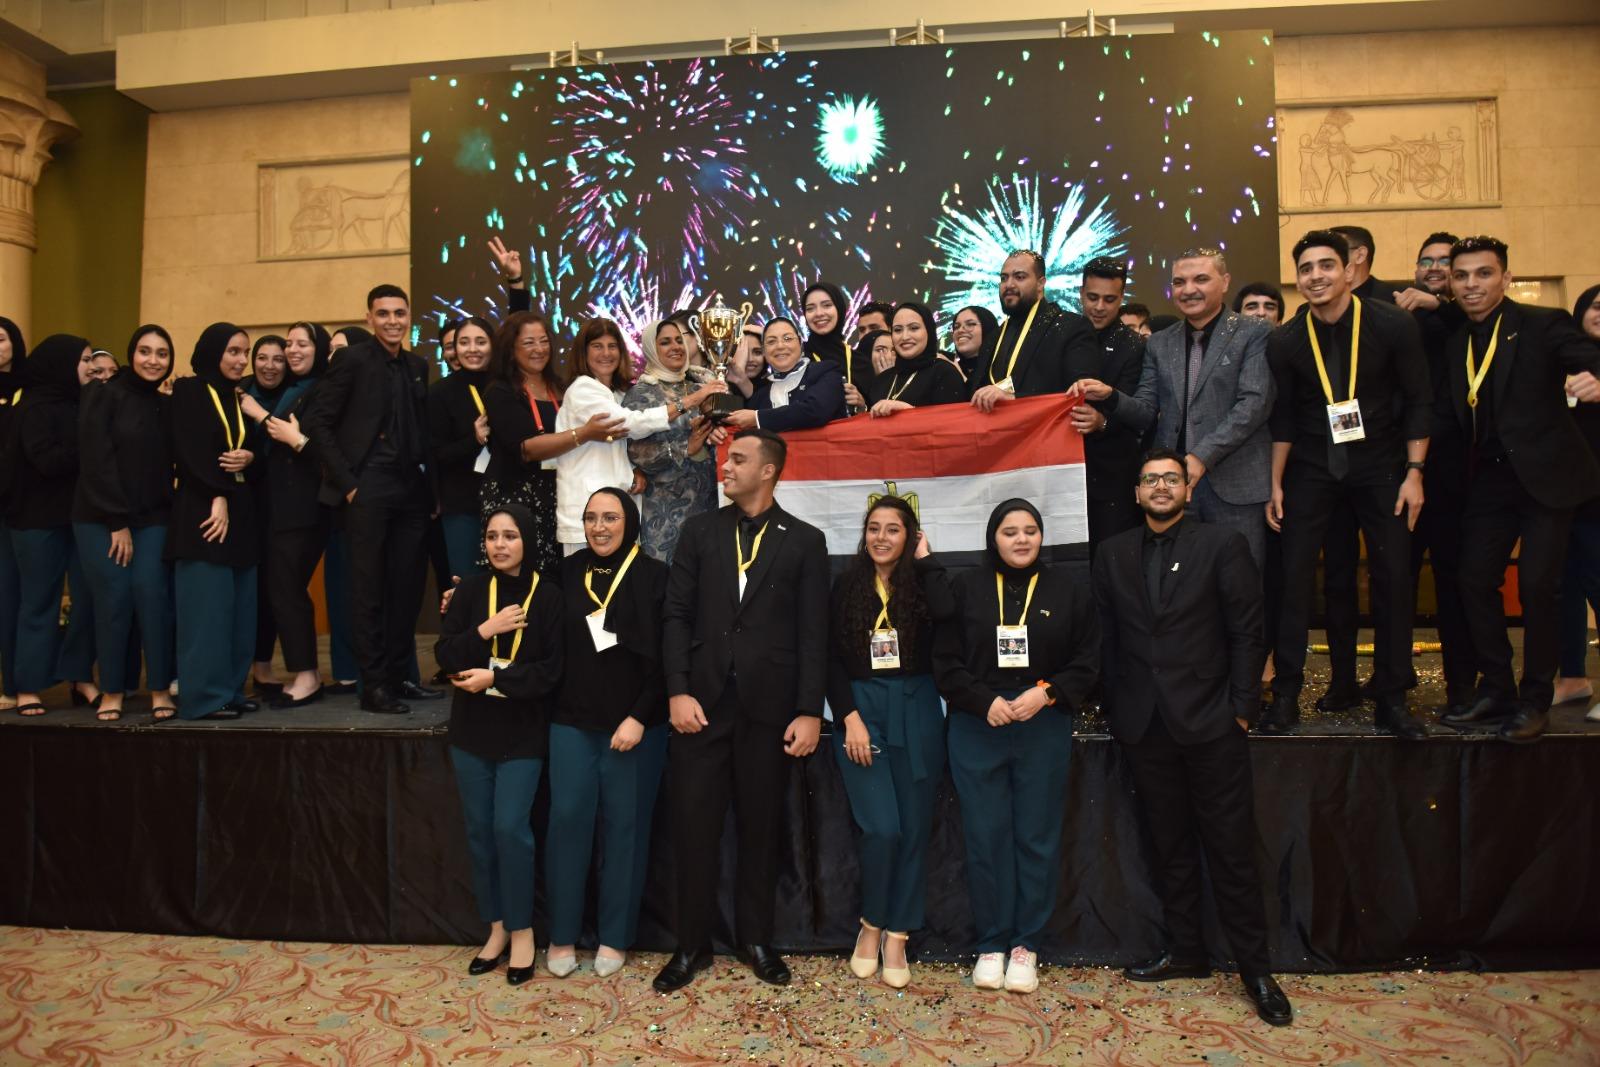 Orange sponsored Enactus national competition for the 17th year in a row